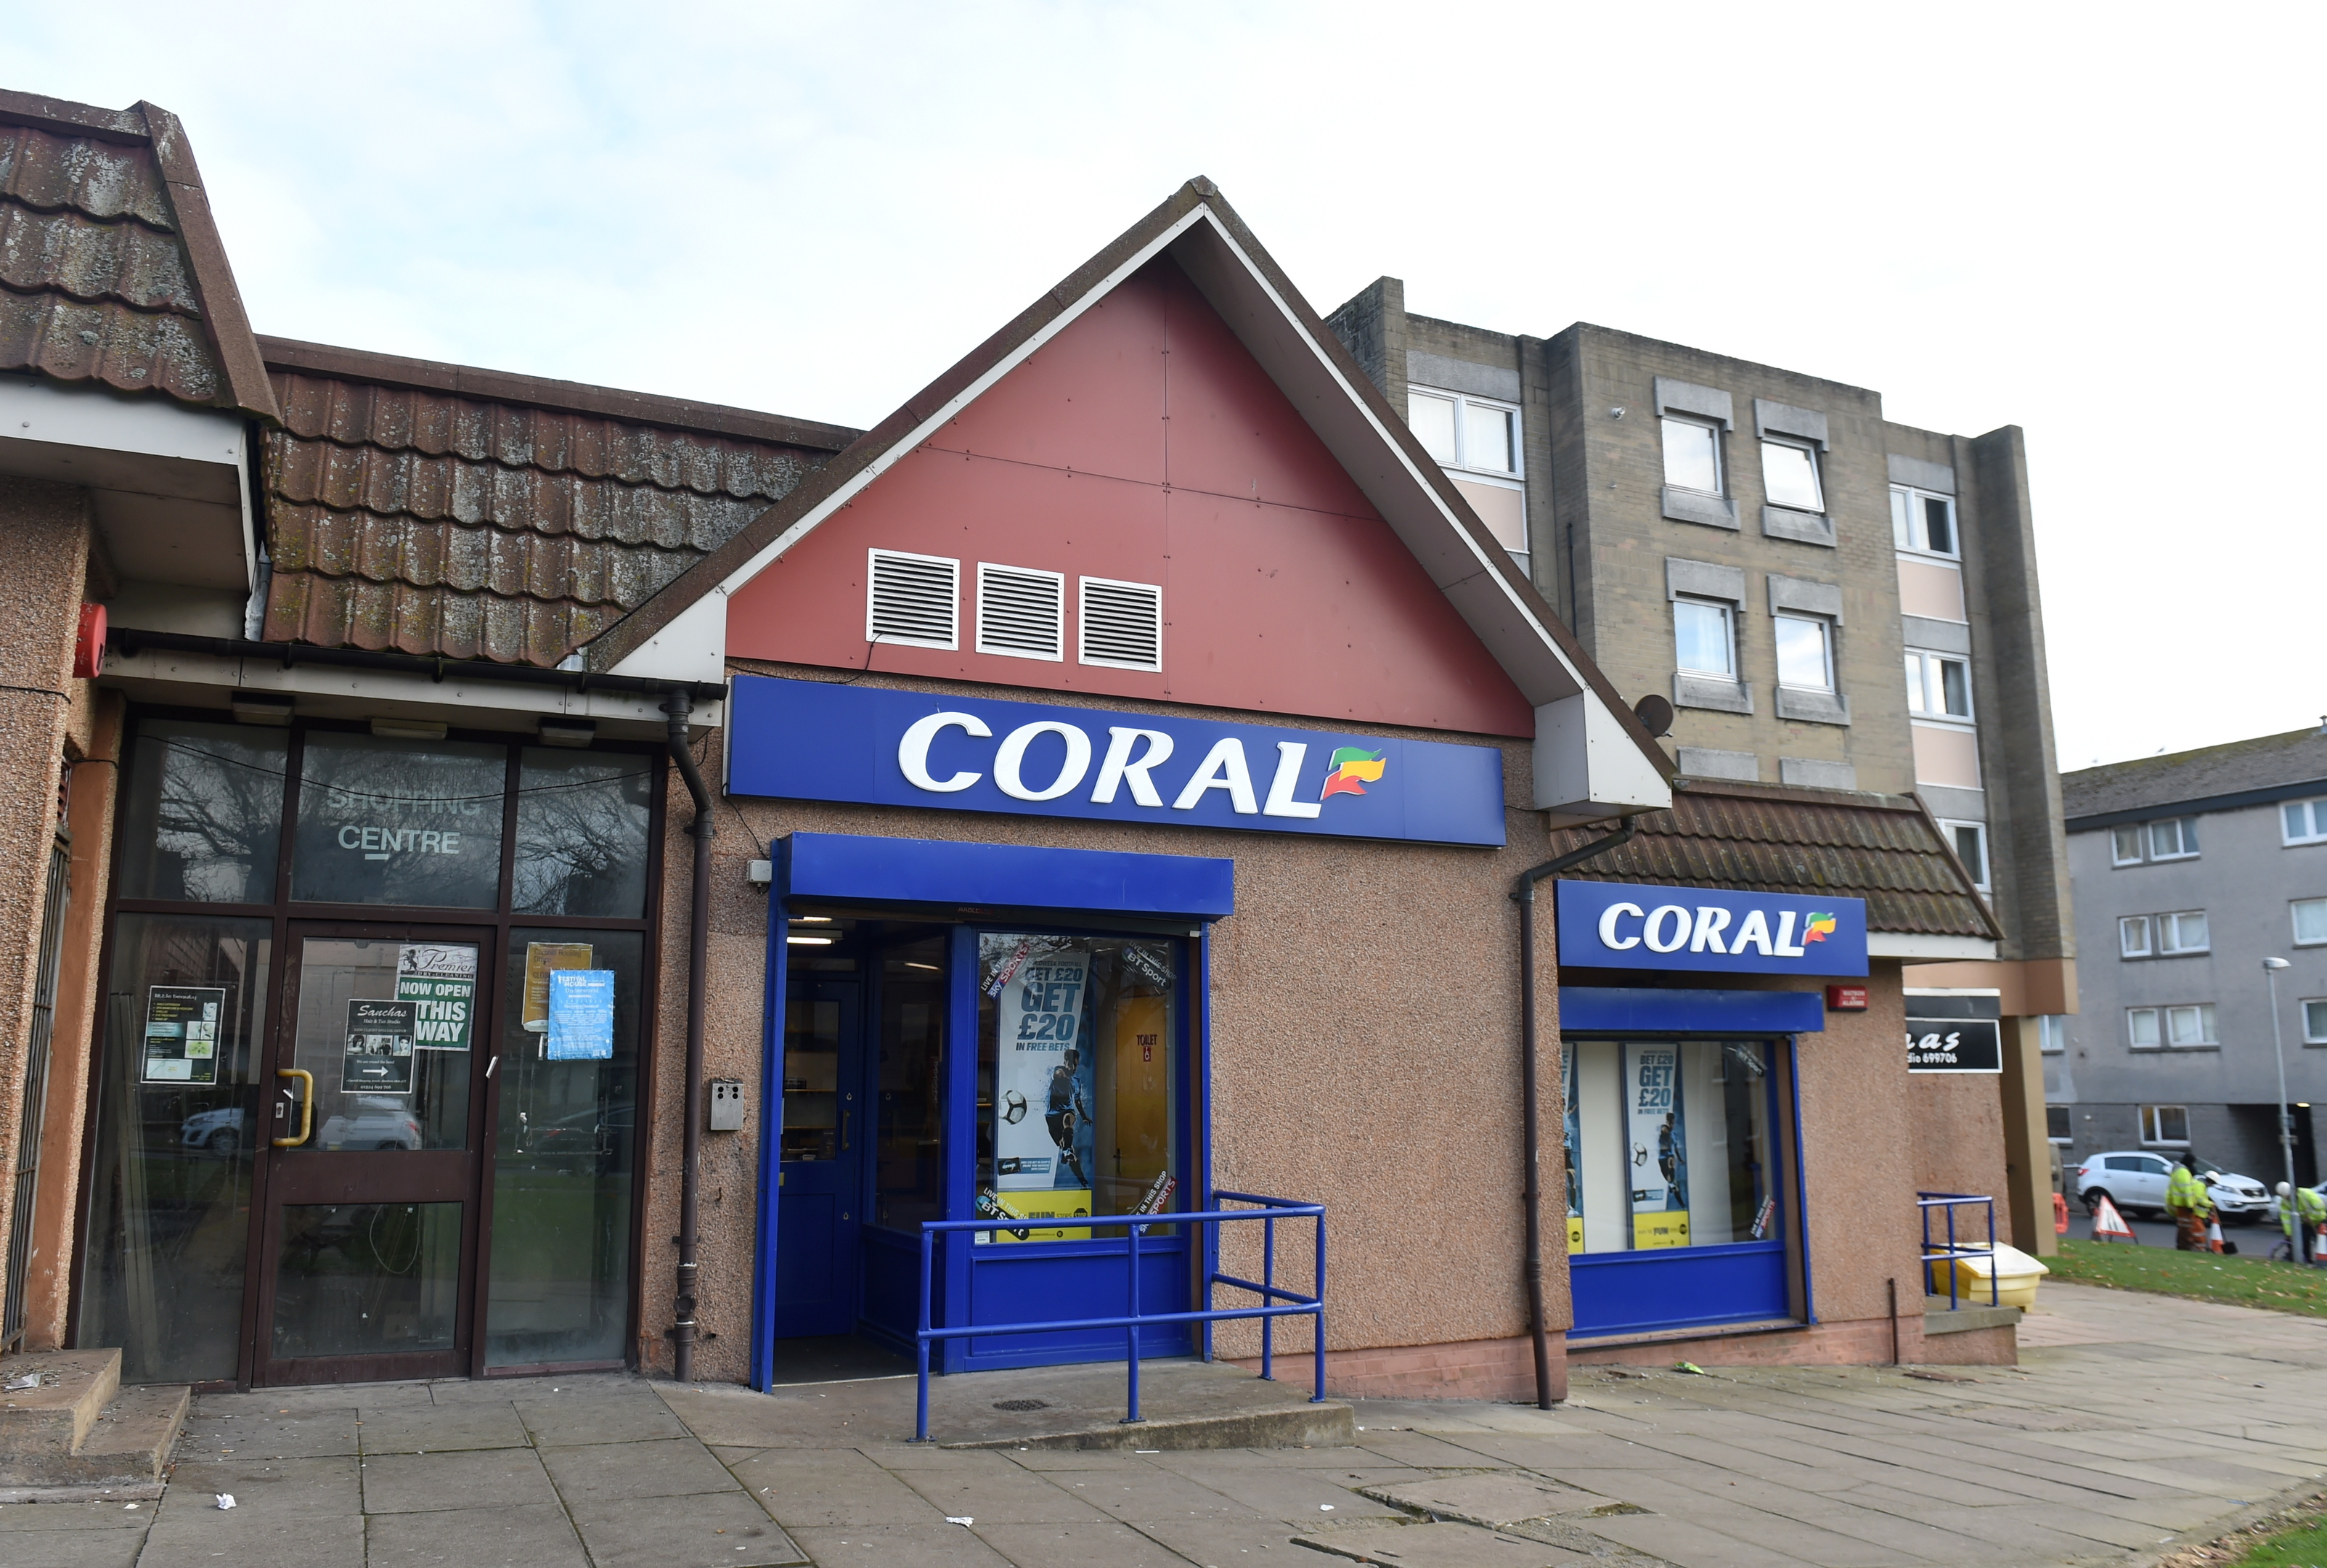 Coral betting shop in Cornhill, Aberdeen.